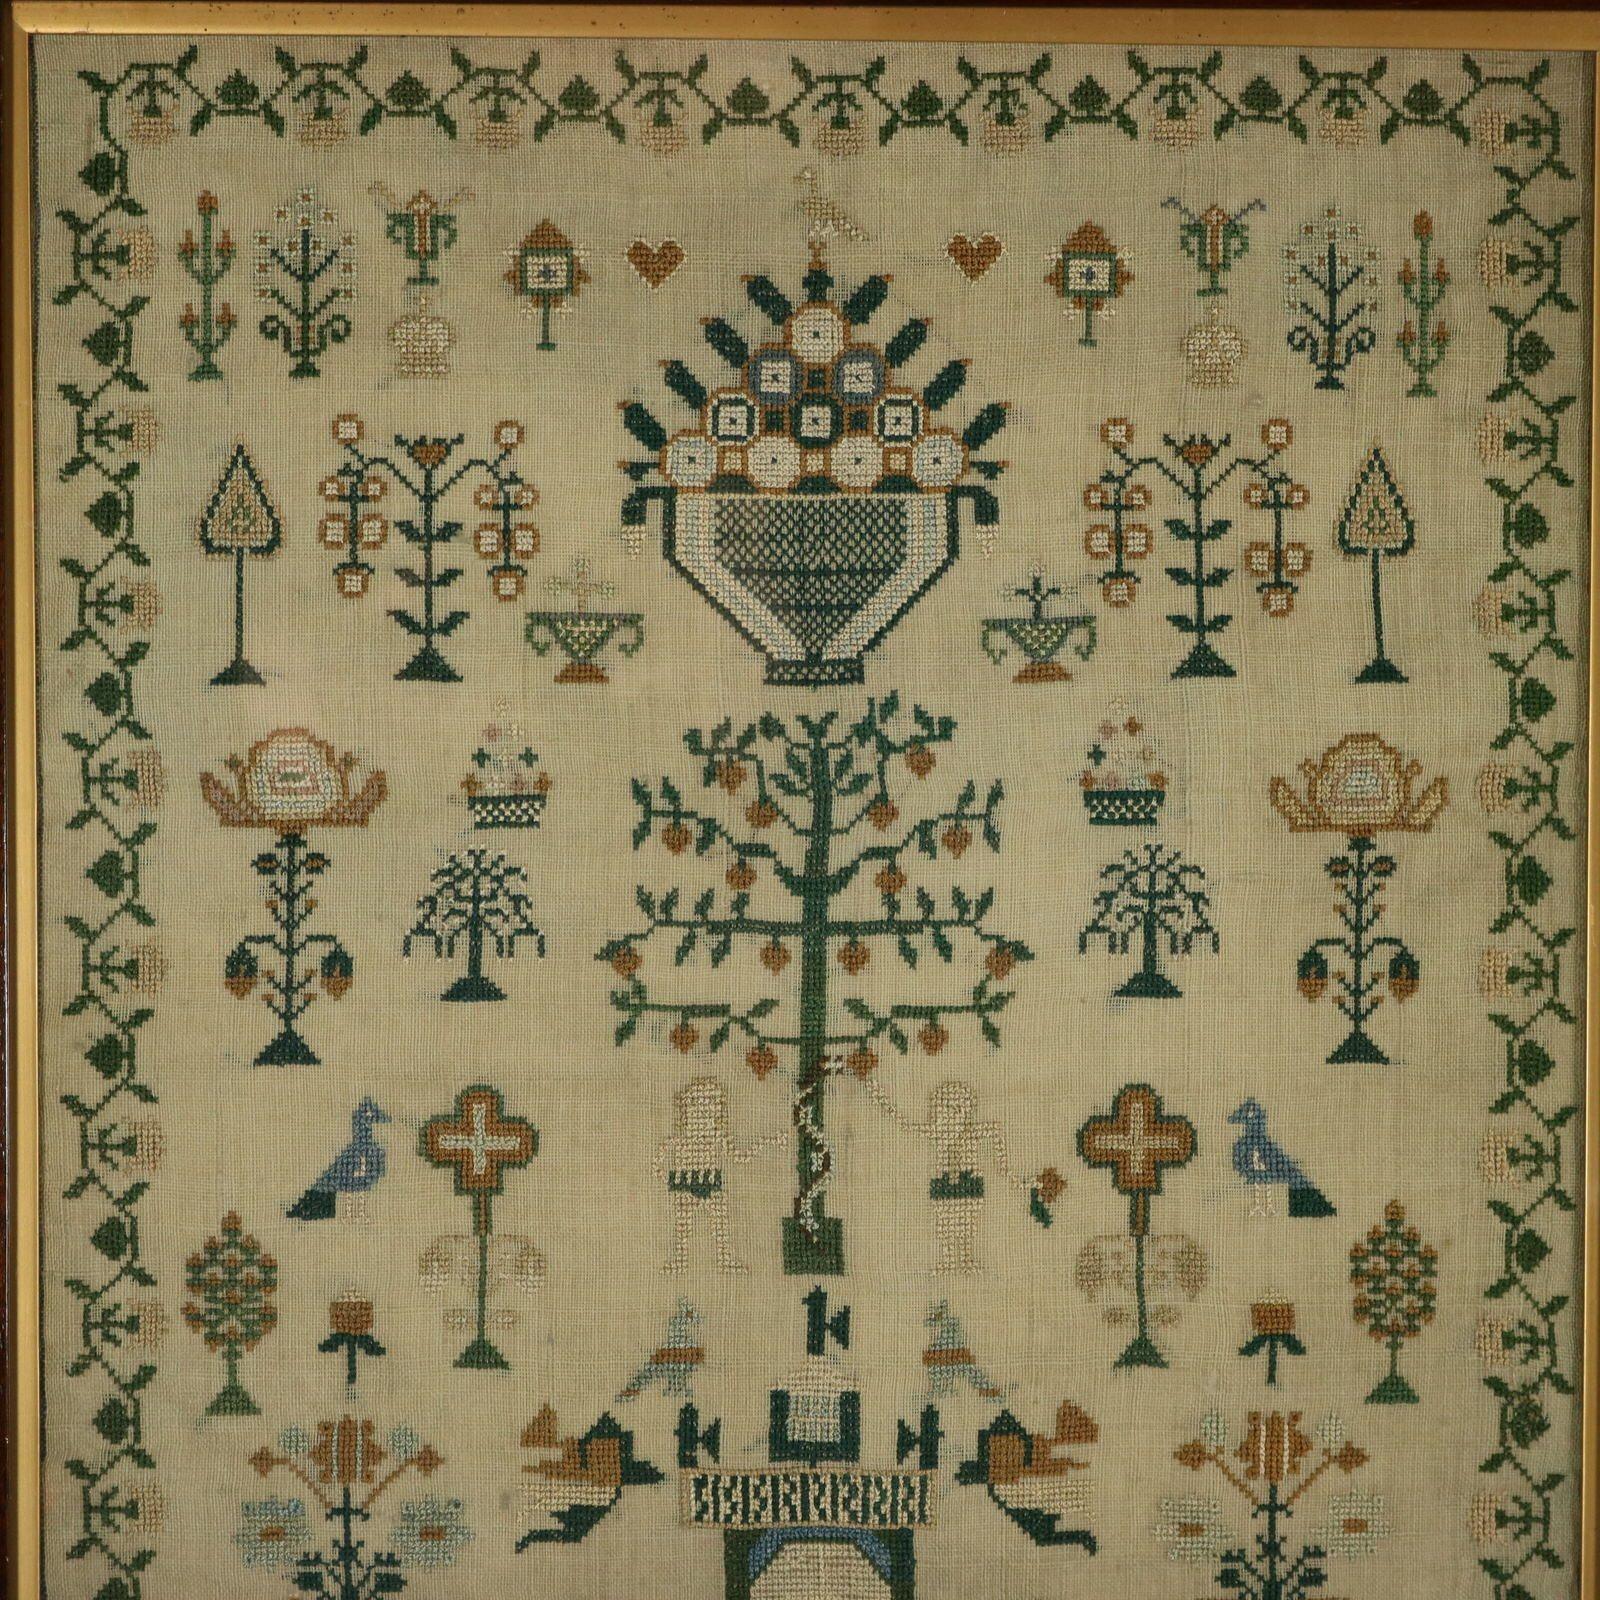 Regency period Sampler, stitched in 1825, by Mary Parry. The sampler is worked in silk threads on a linen ground, mainly in cross stitch. Meandering floral border. Colours green, cream, silver, blue and copper. Signed and dated, 'Mary Parry her Work